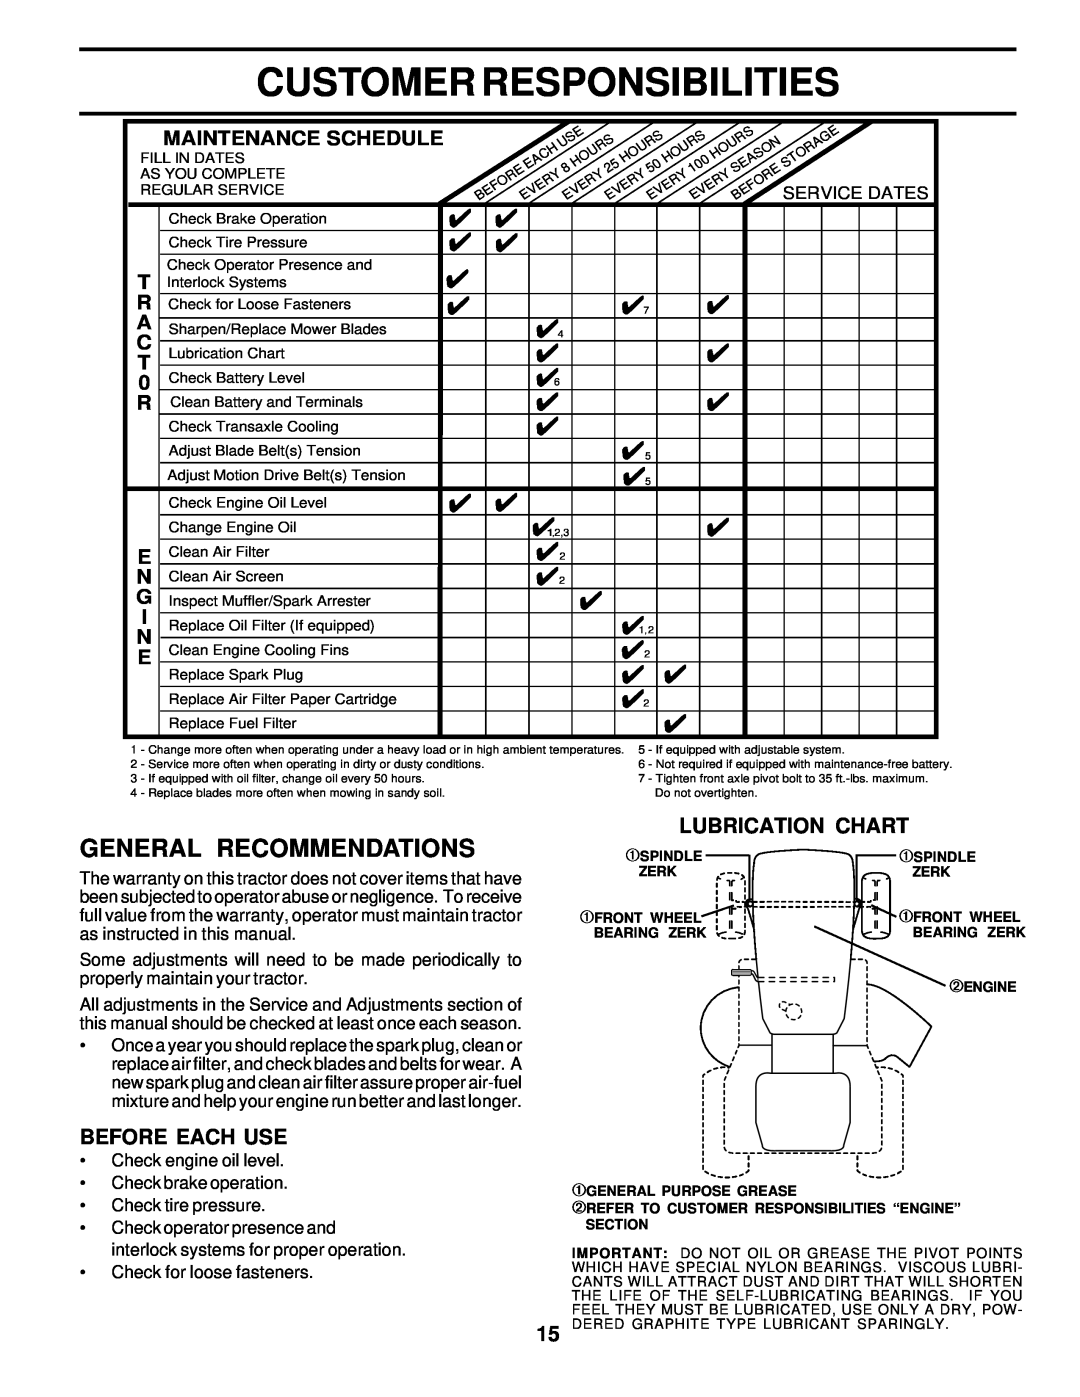 Poulan PRK17H42STA owner manual Customer Responsibilities, General Recommendations, Before Each Use, Lubrication Chart 